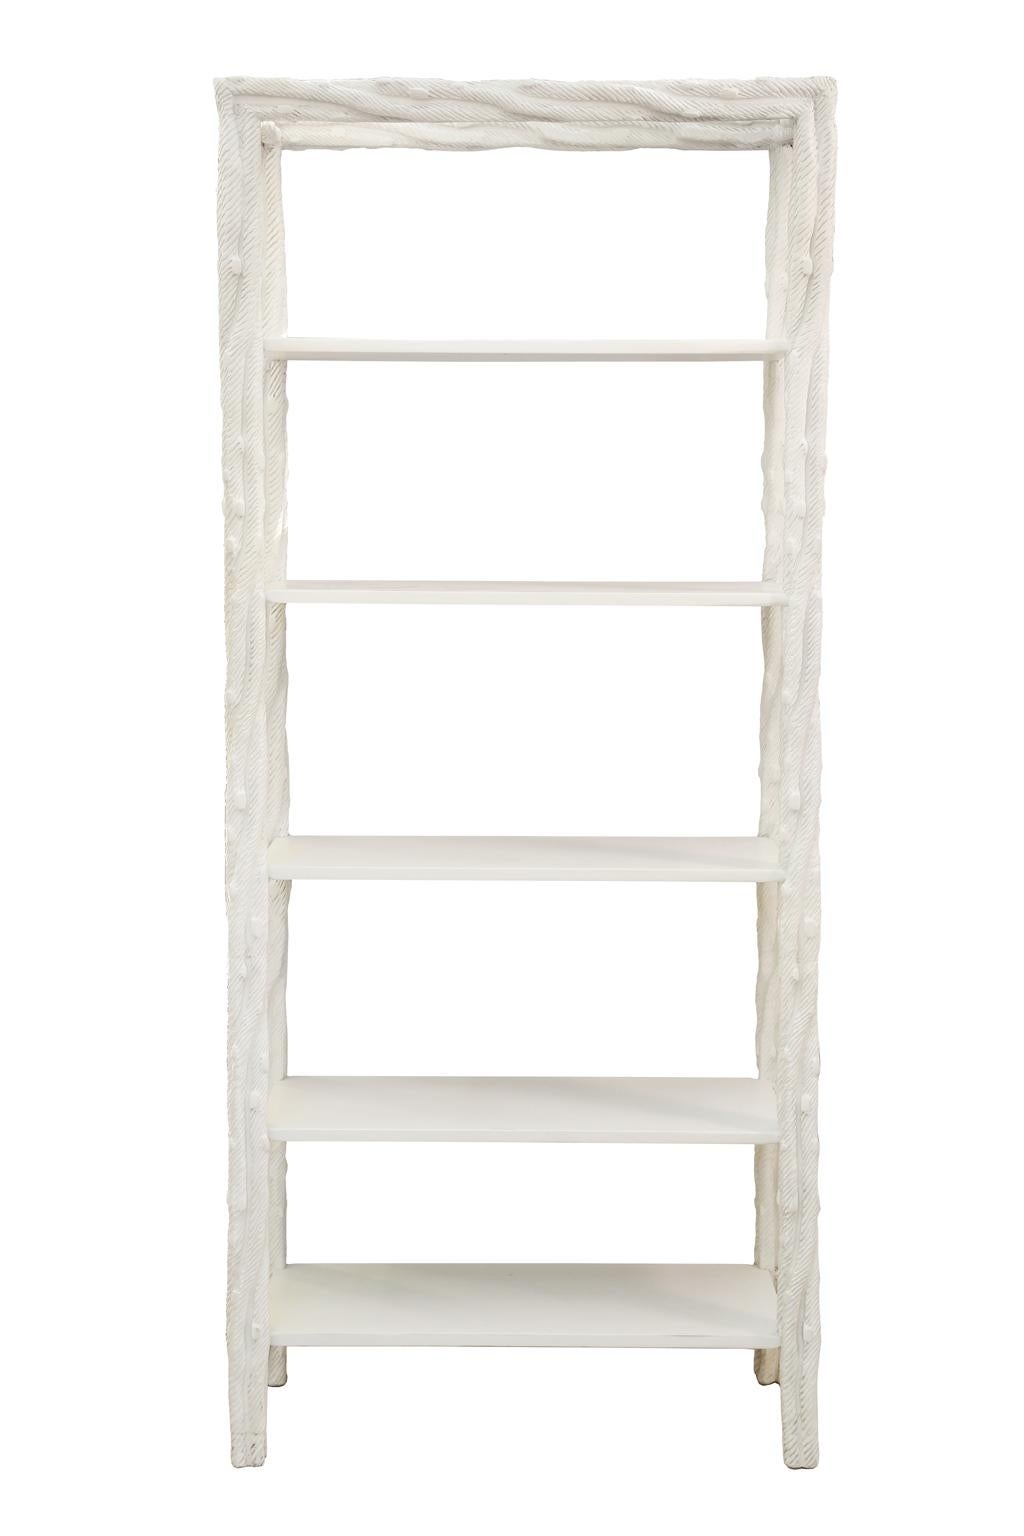 Pair of shelving units, each white painted frame carved to resemble raw wooden branches, holding five rectangular shelves.

Stock ID: D2459.